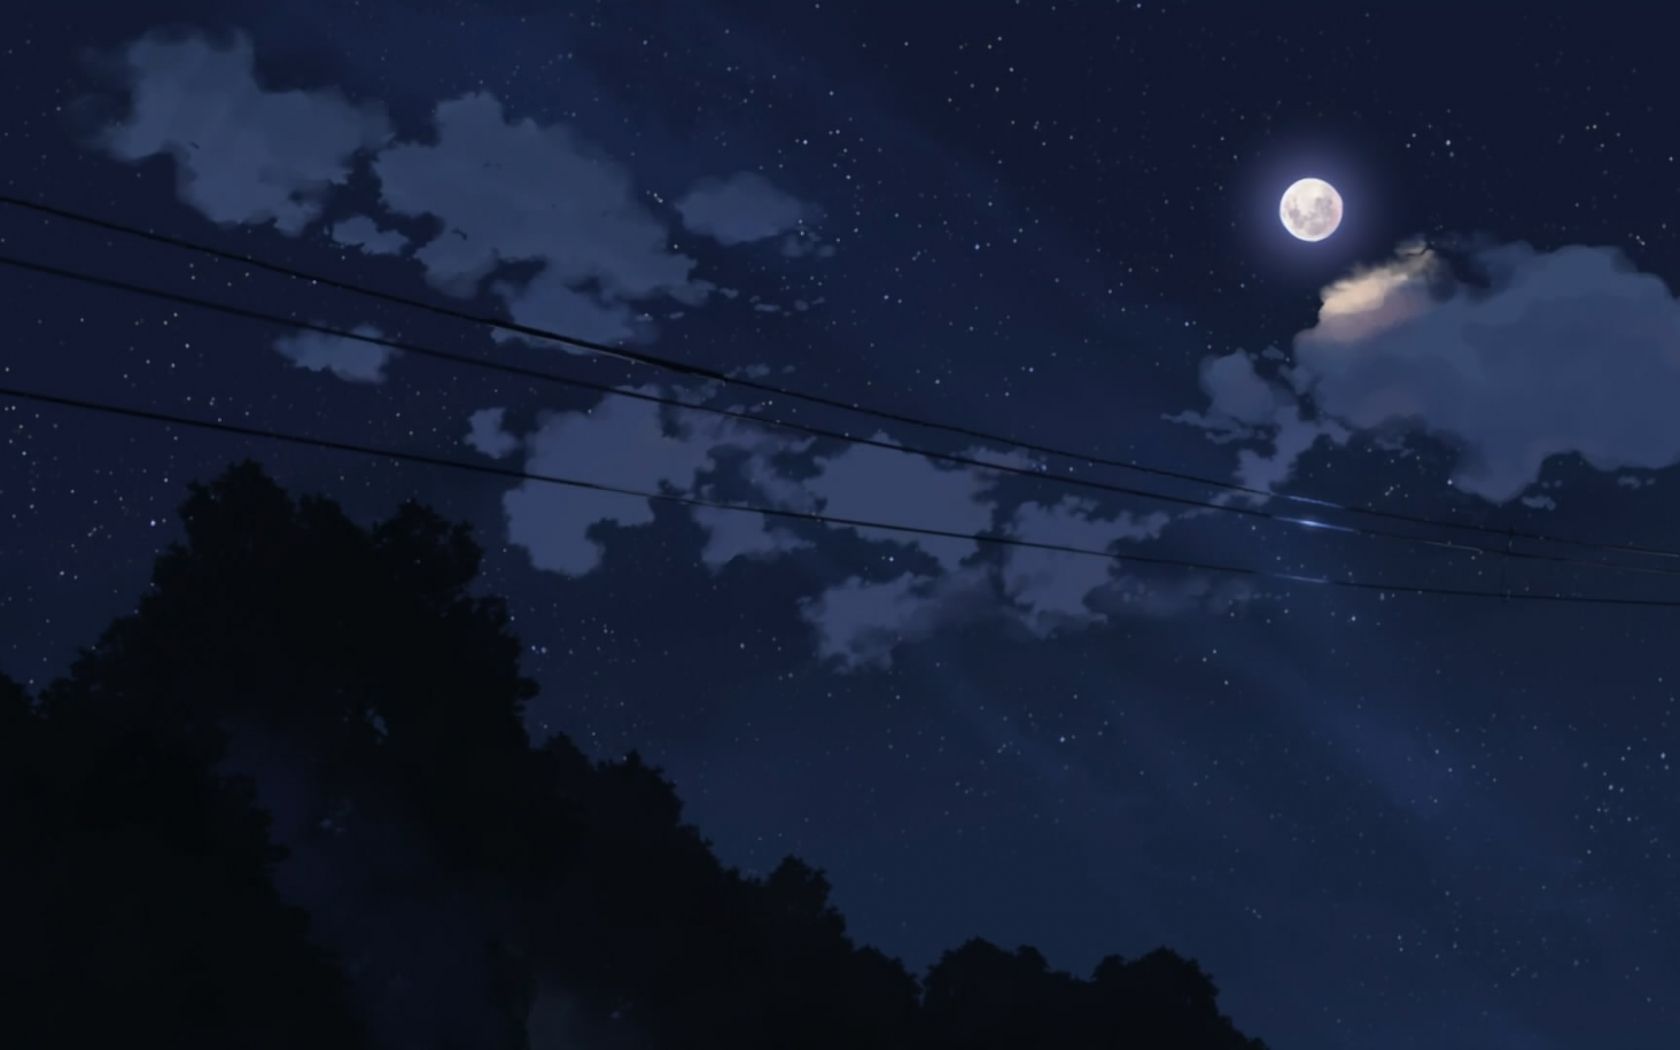 Free download Download Anime Night Sky Wallpaper 5776 1920x1080 px